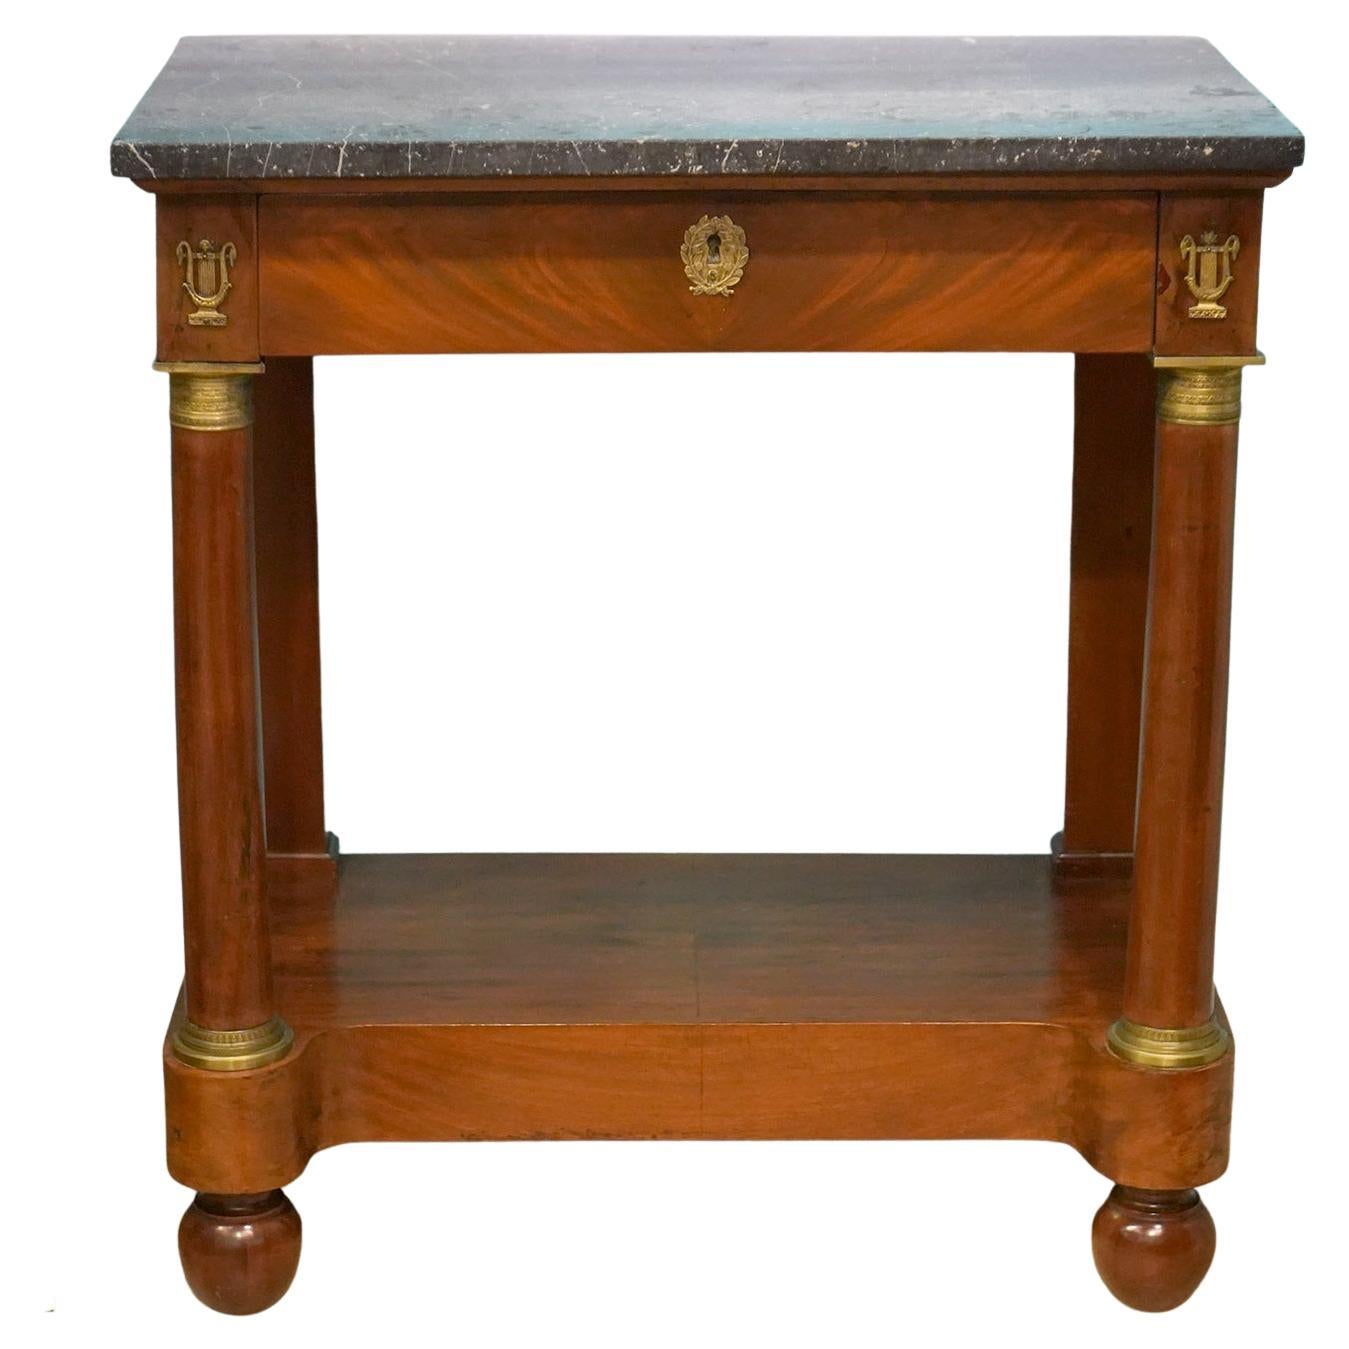 French Late Empire Period Marble Top Gilt Bronze Mounted Mahogany Console Table